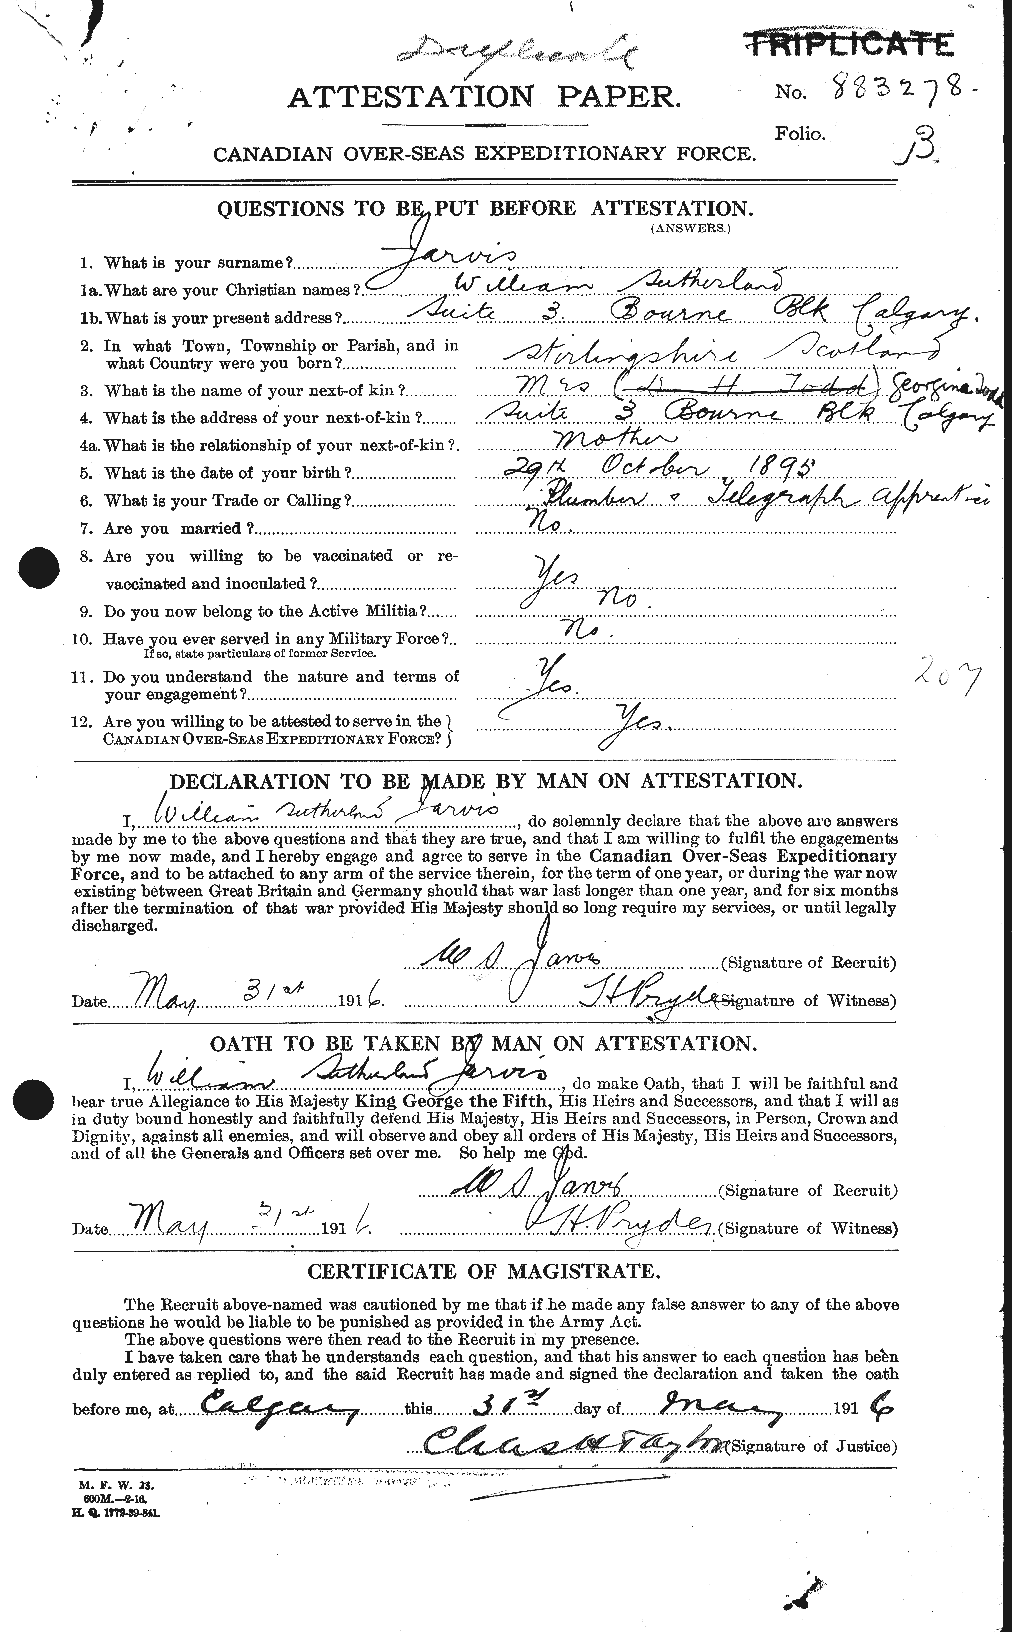 Personnel Records of the First World War - CEF 415894a